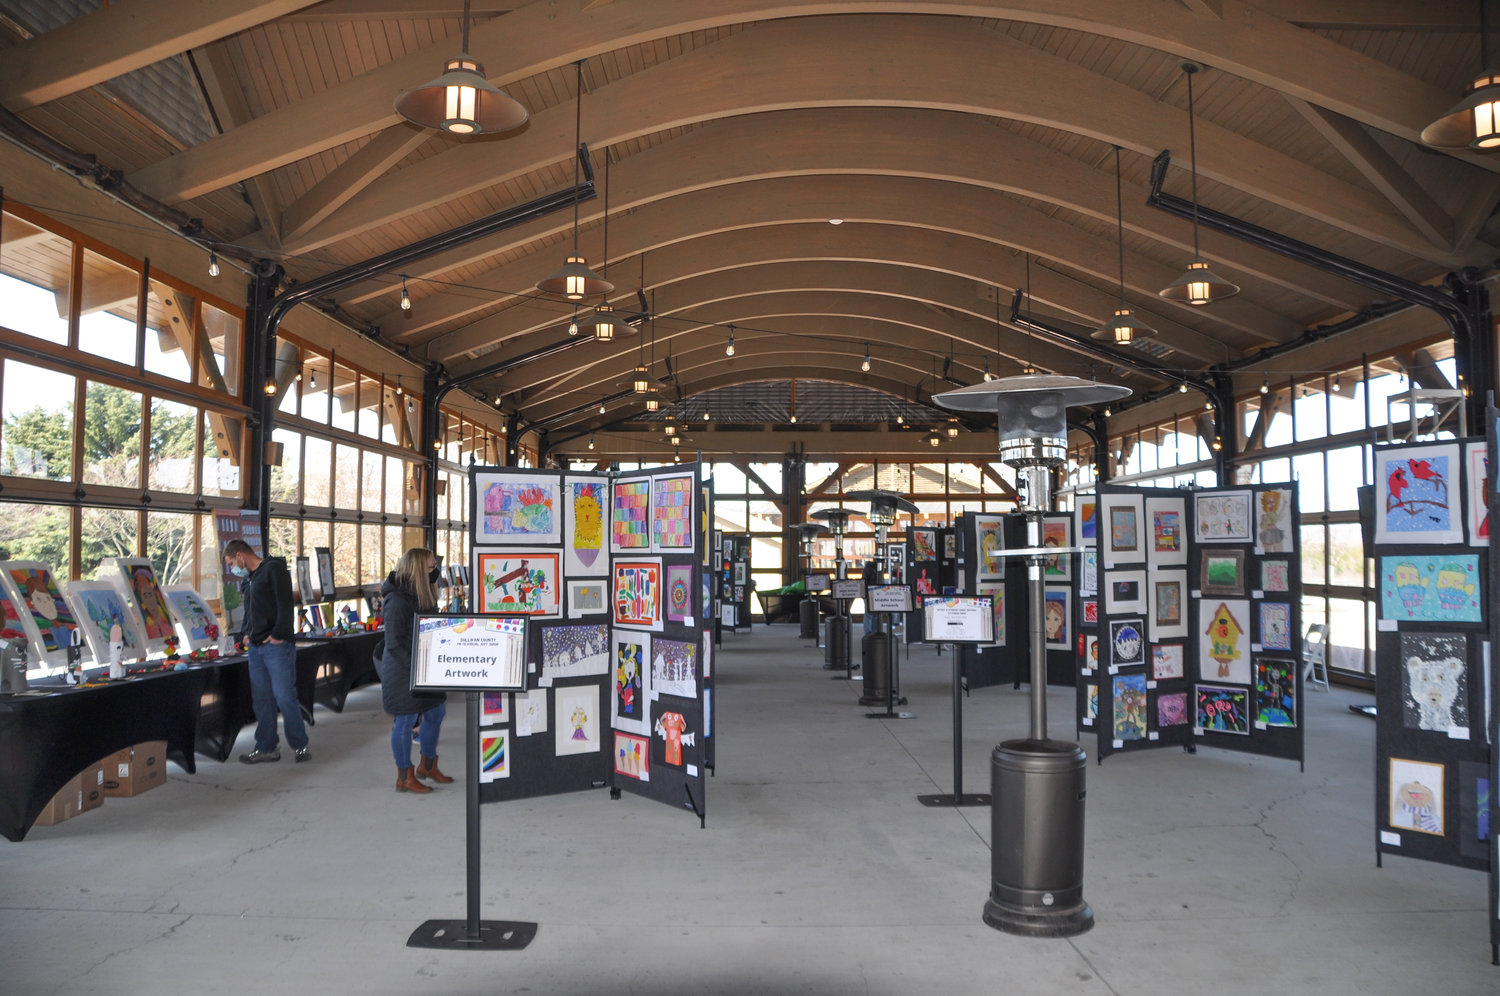 I went back to Bethel Woods, this time to check out the Sullivan County Visual Art Show, which represented eight participating school districts, including young artists from BOCES.